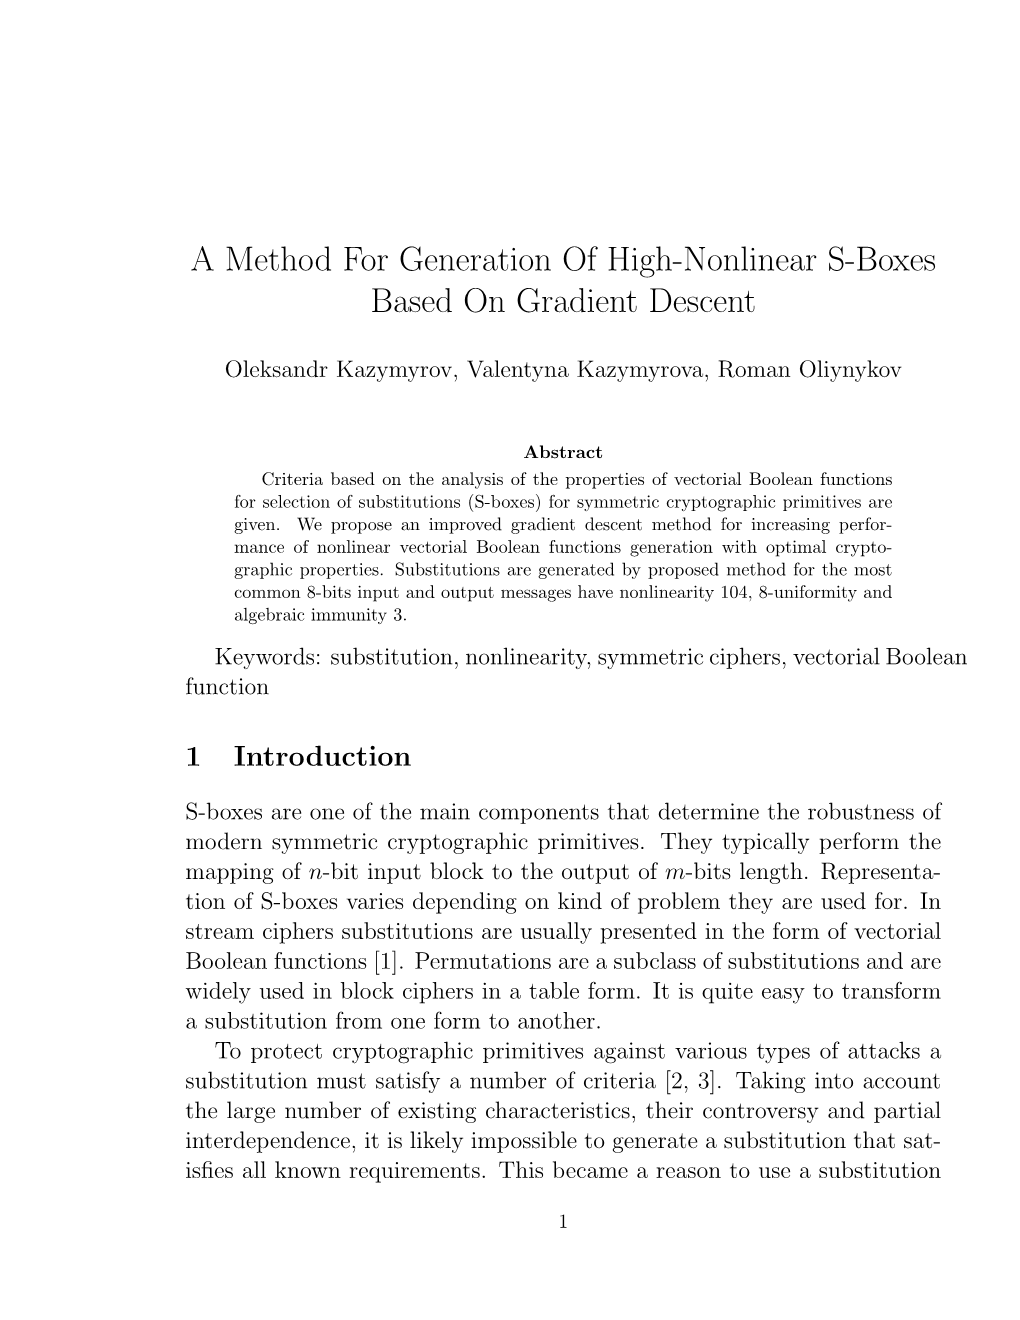 A Method for Generation of High-Nonlinear S-Boxes Based on Gradient Descent